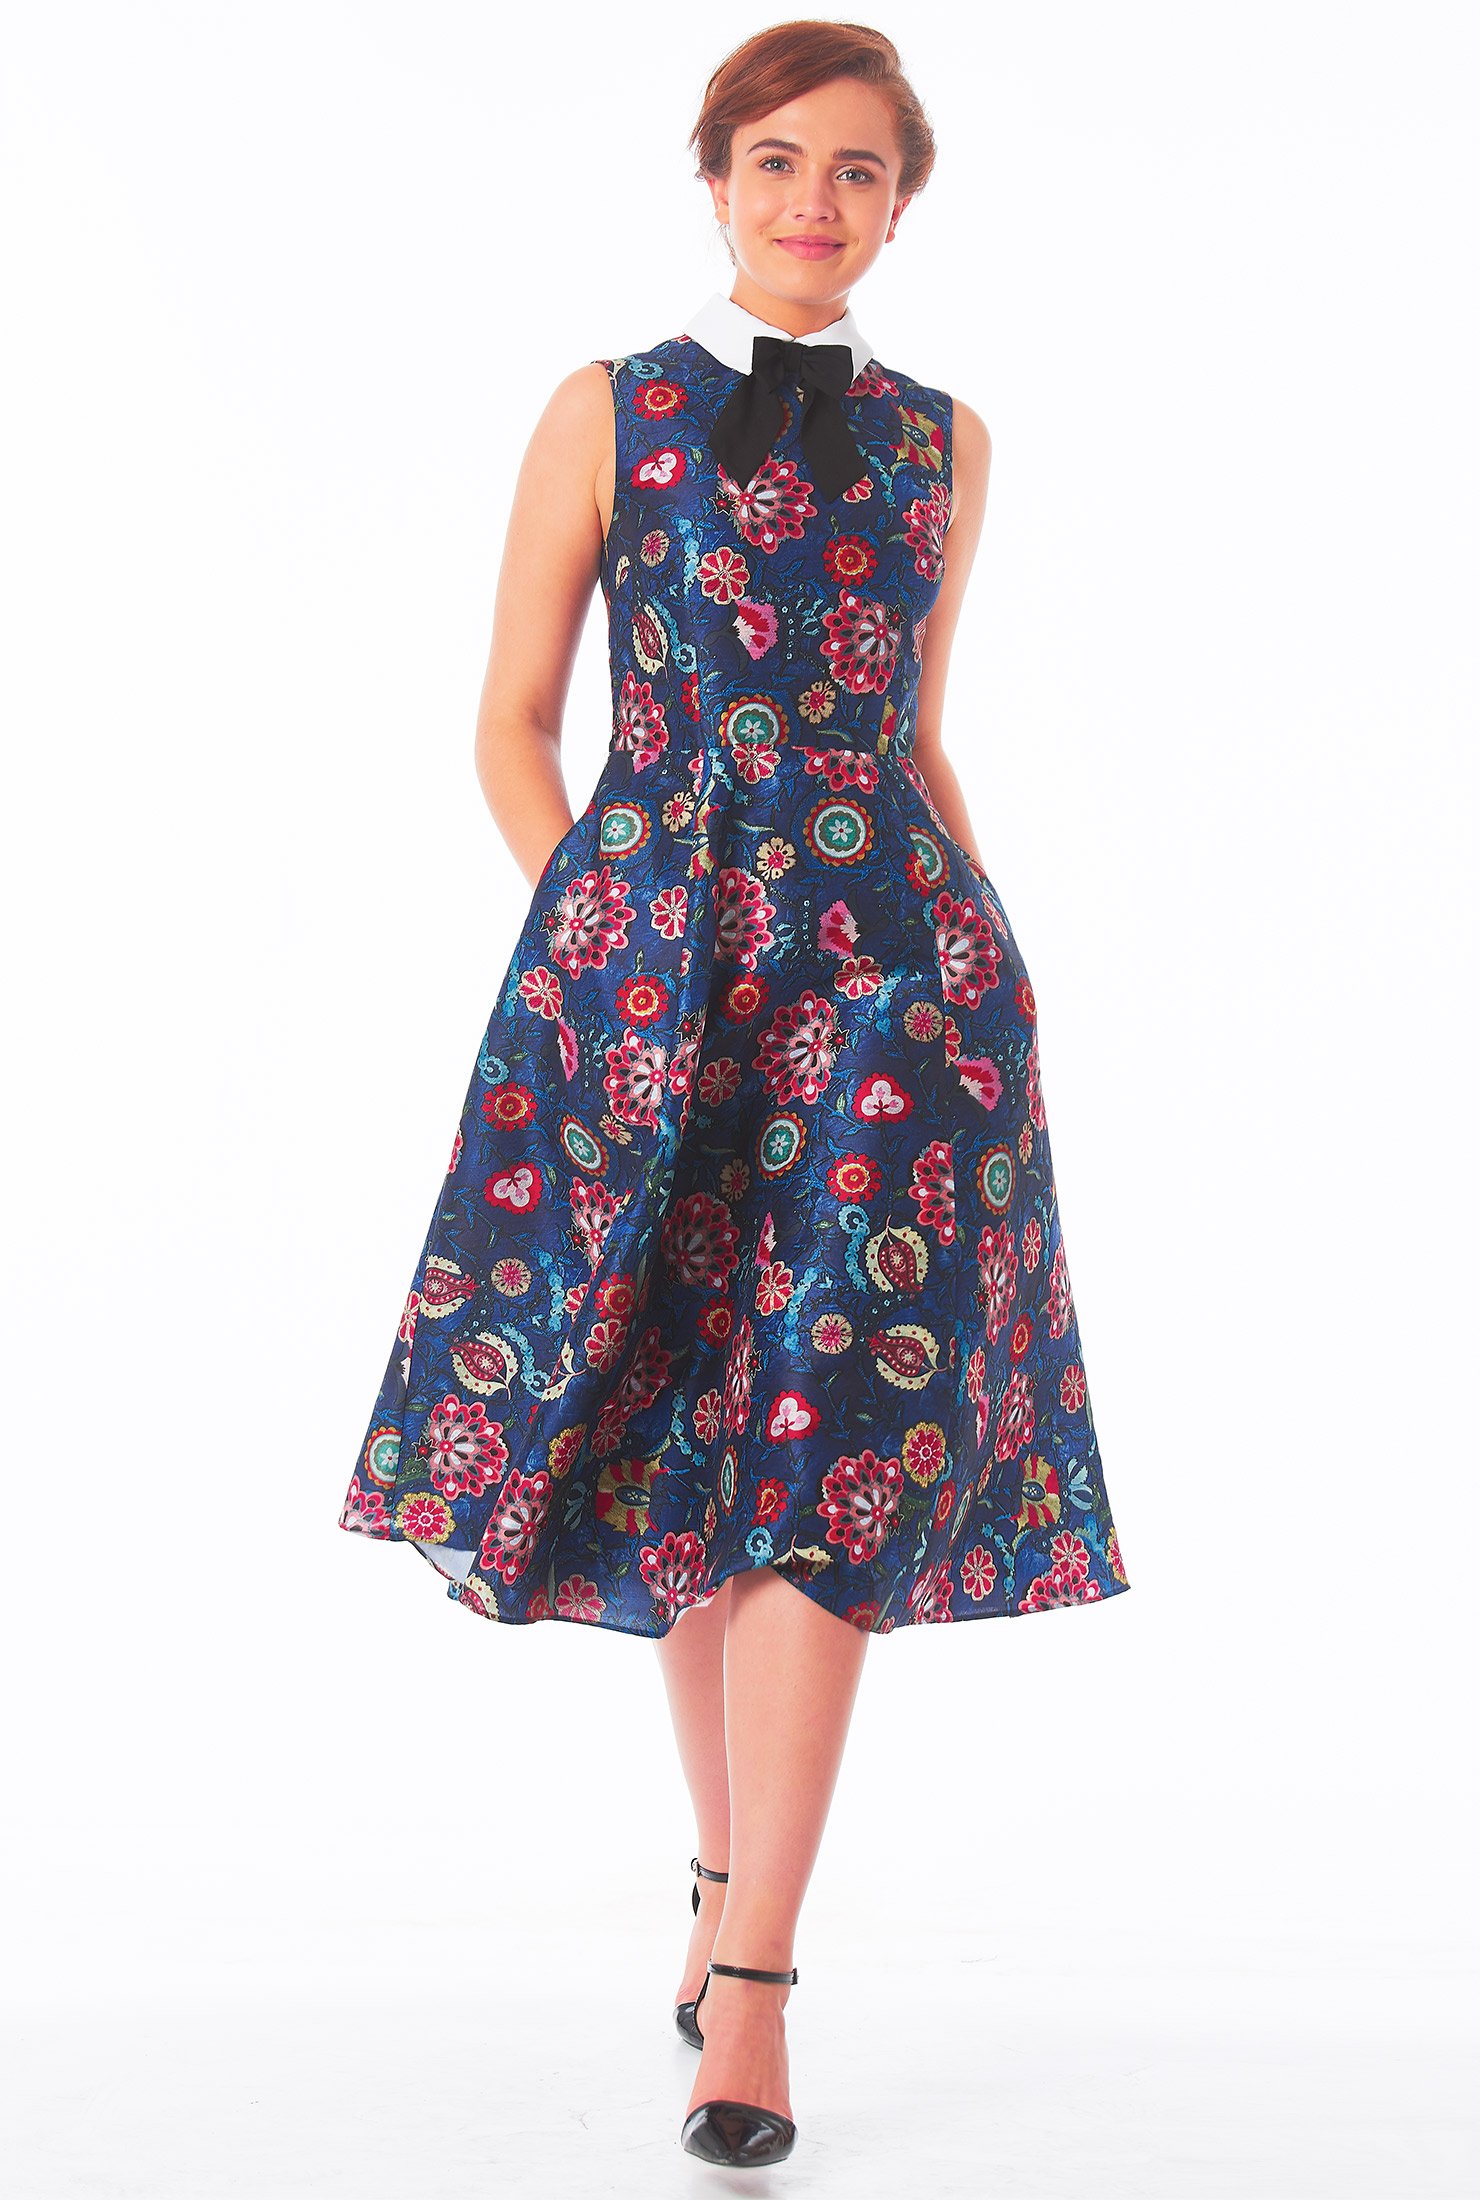 Shop Floral print with detachable collar and bow-tie dupioni dress ...